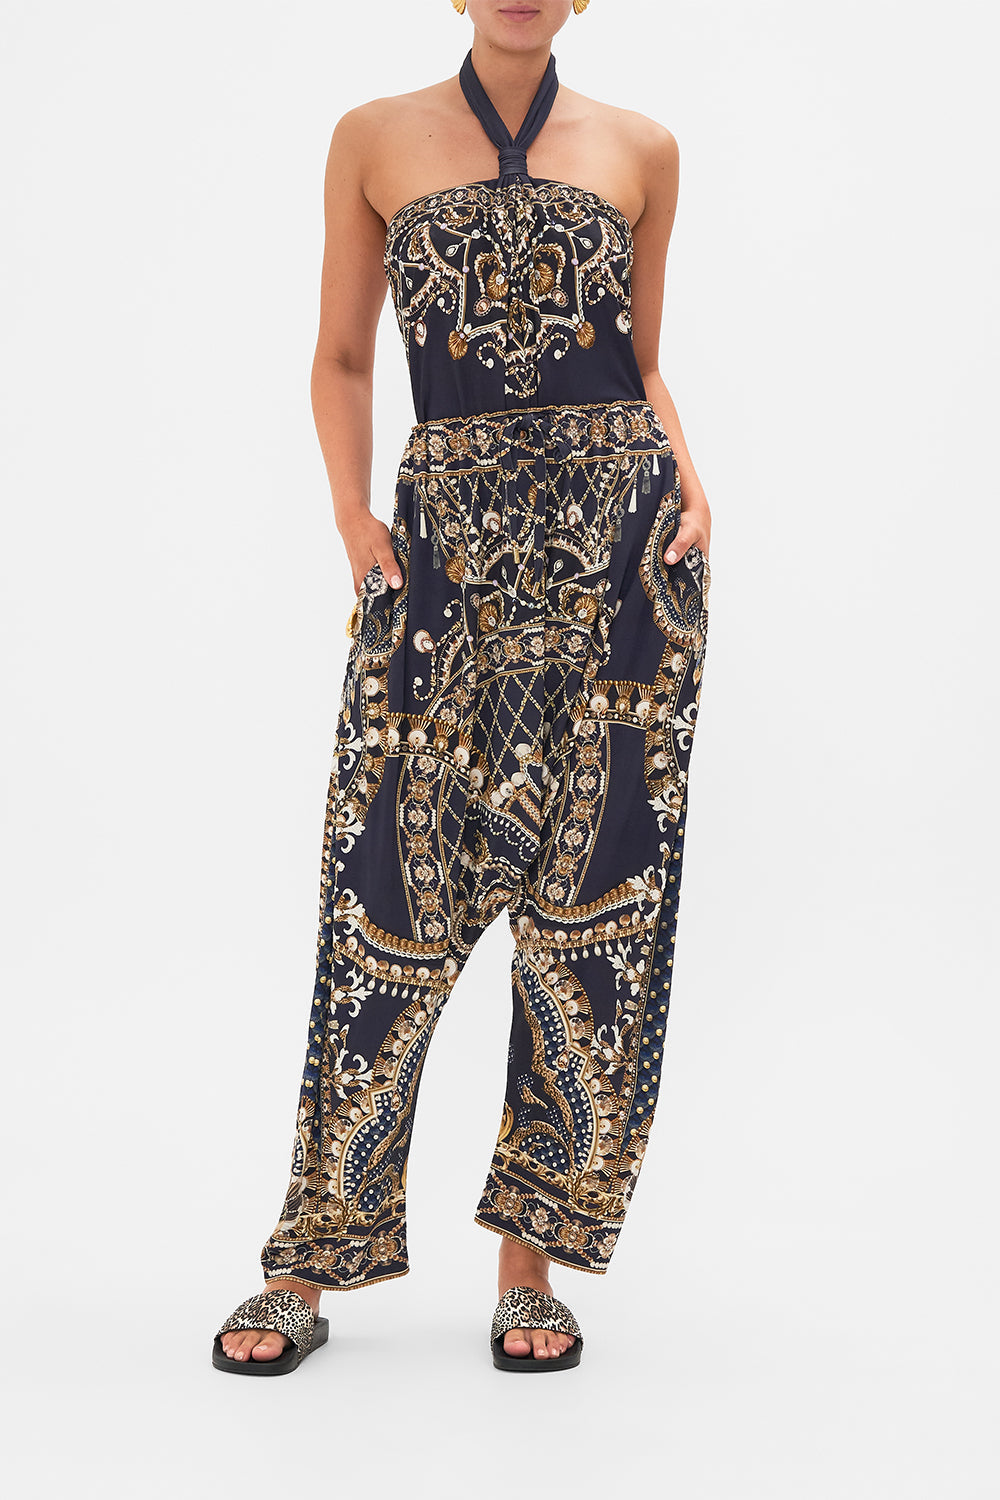 CAMILLA Jersey draped pant in Dance With The Duke print